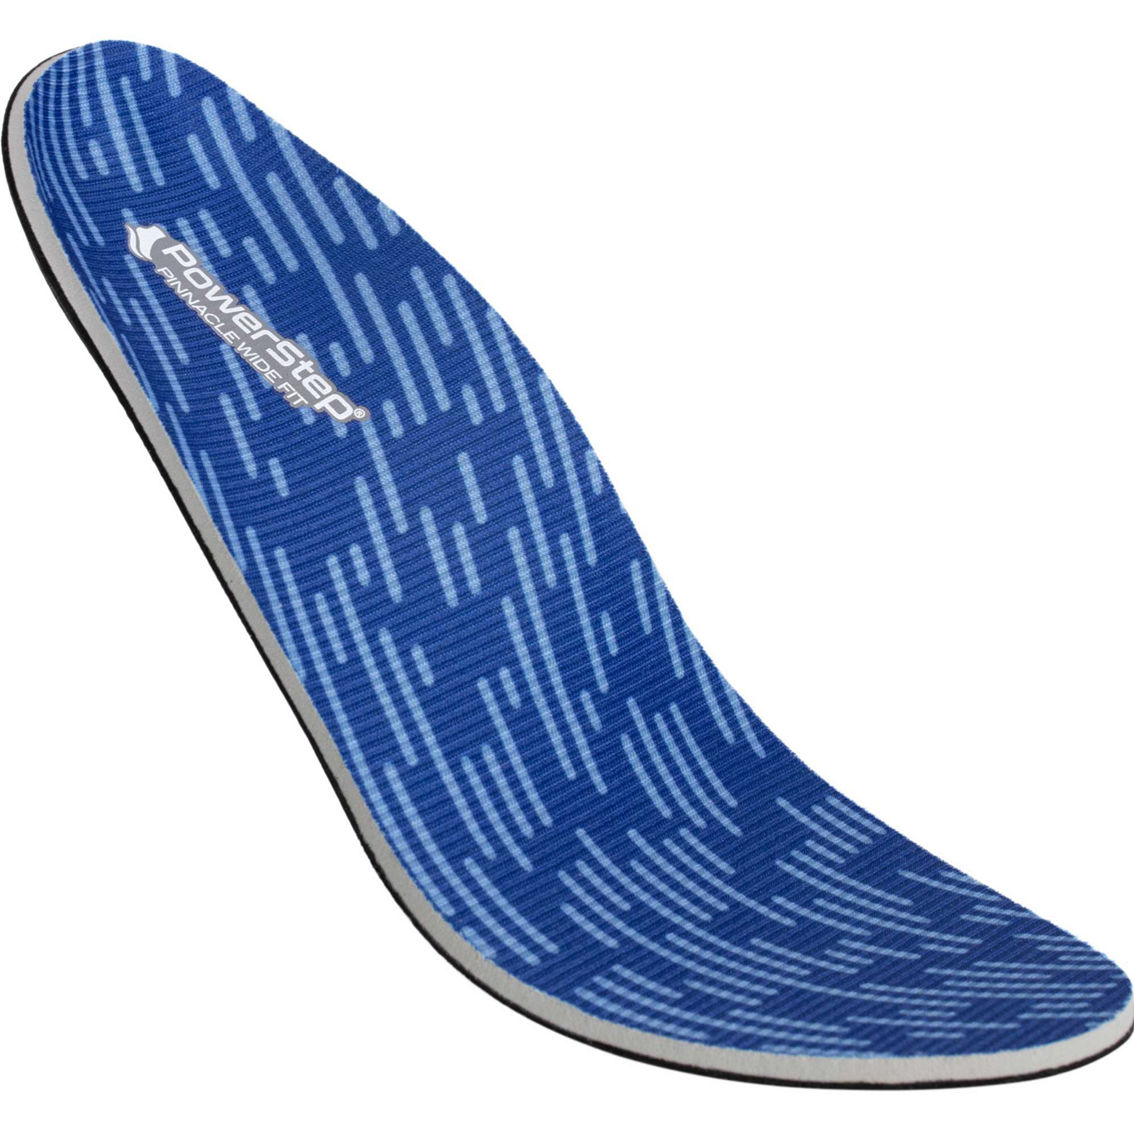 Powerstep Wide Fit Full Length Orthotic Shoe Insoles - Image 5 of 6